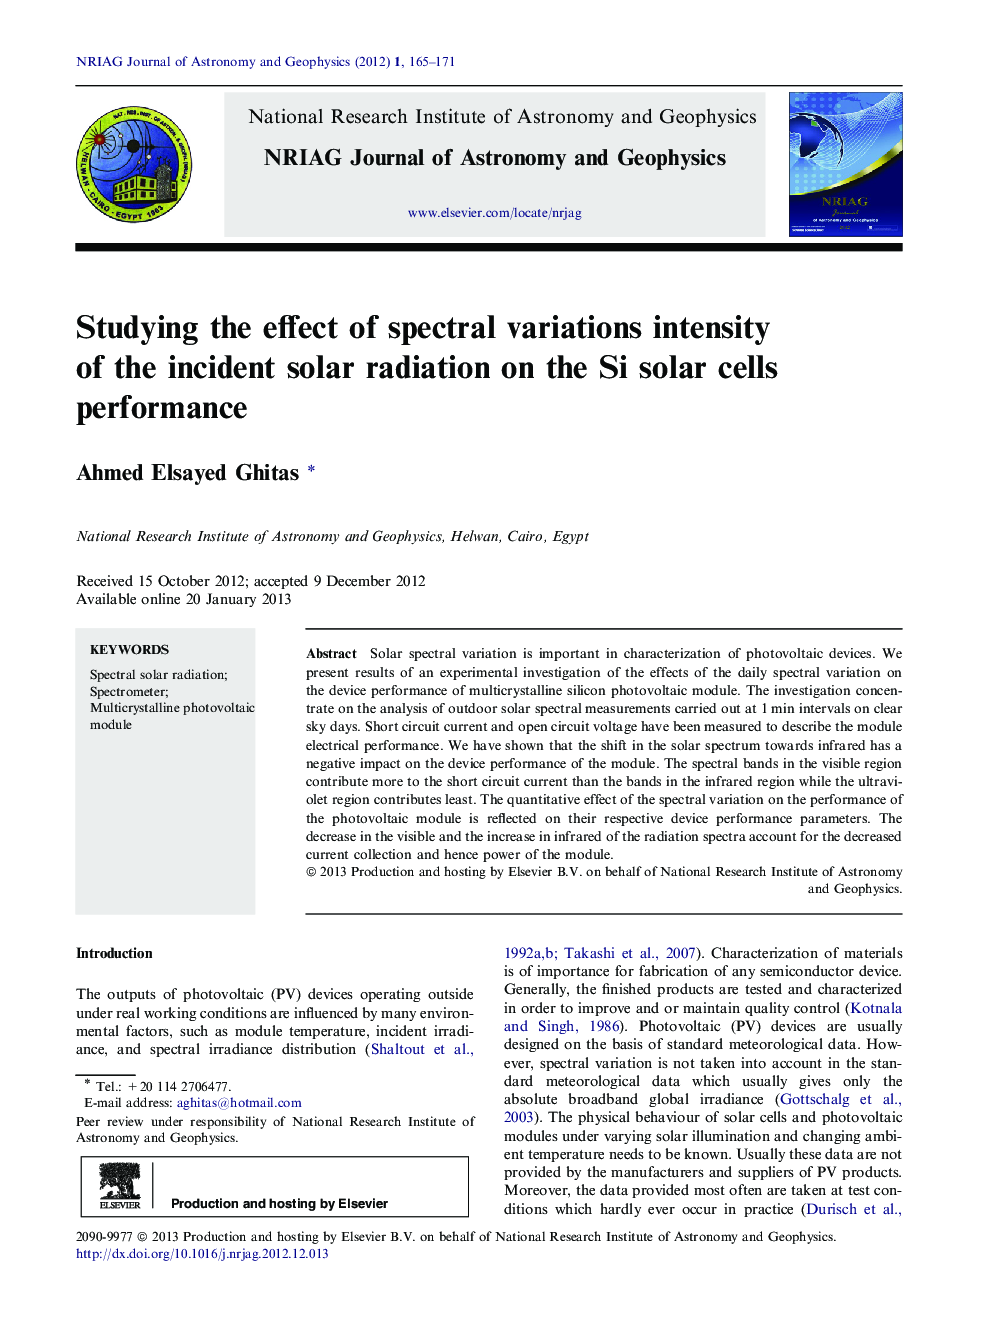 Studying the effect of spectral variations intensity of the incident solar radiation on the Si solar cells performance 